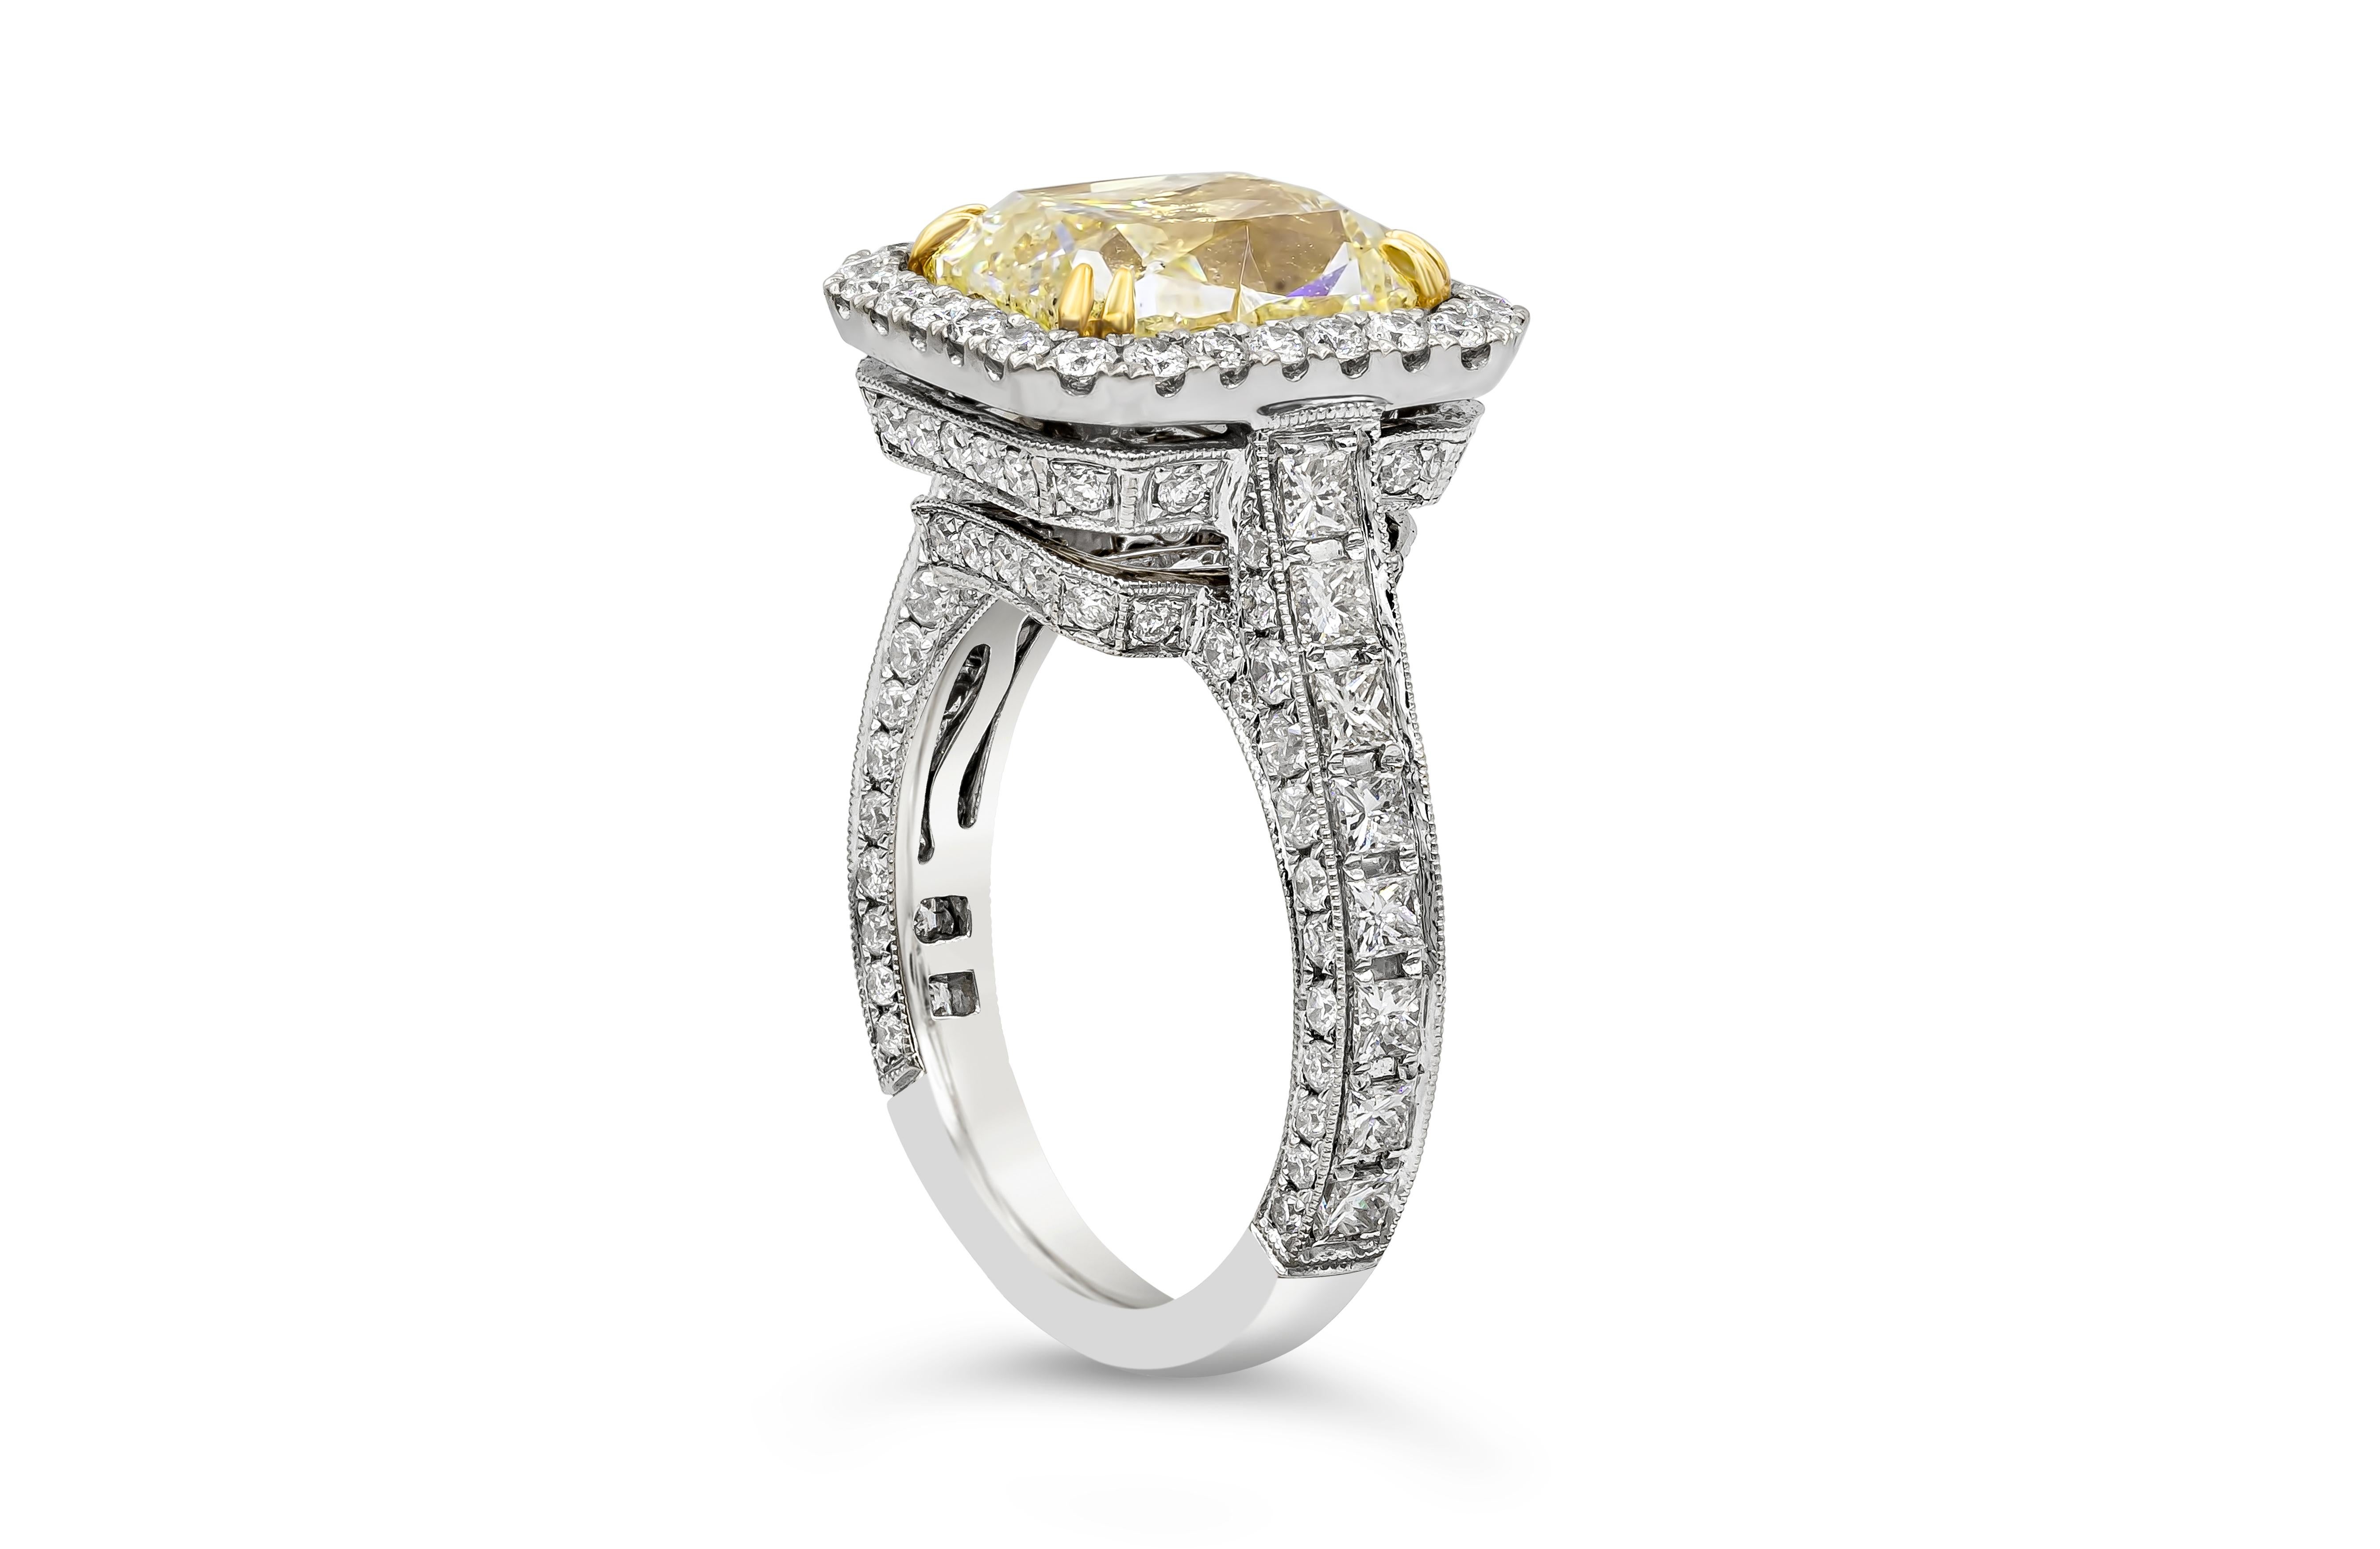 A contemporary engagement ring showcasing a 5.07 carats elongated cushion cut diamond, certified by GIA as Fancy Light Yellow color, SI2 in clarity, set in a timeless yellow gold eight prong setting. The center diamond is surrounded by a single row